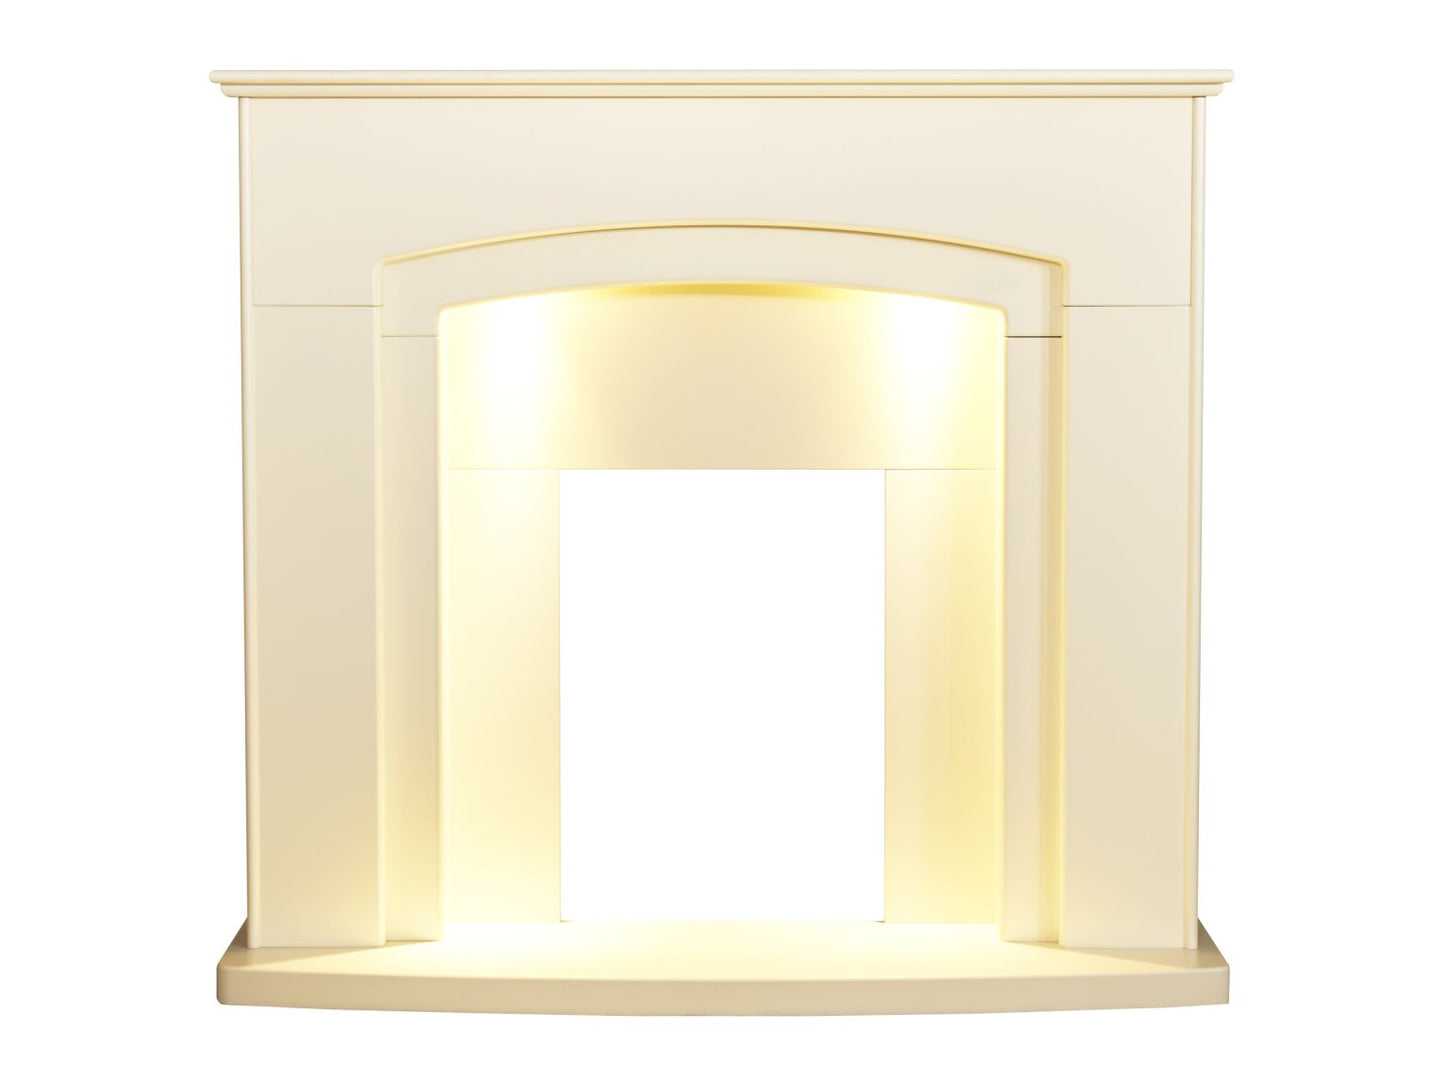 Adam Falmouth Fireplace in Cream with Downlights, 49 Inch